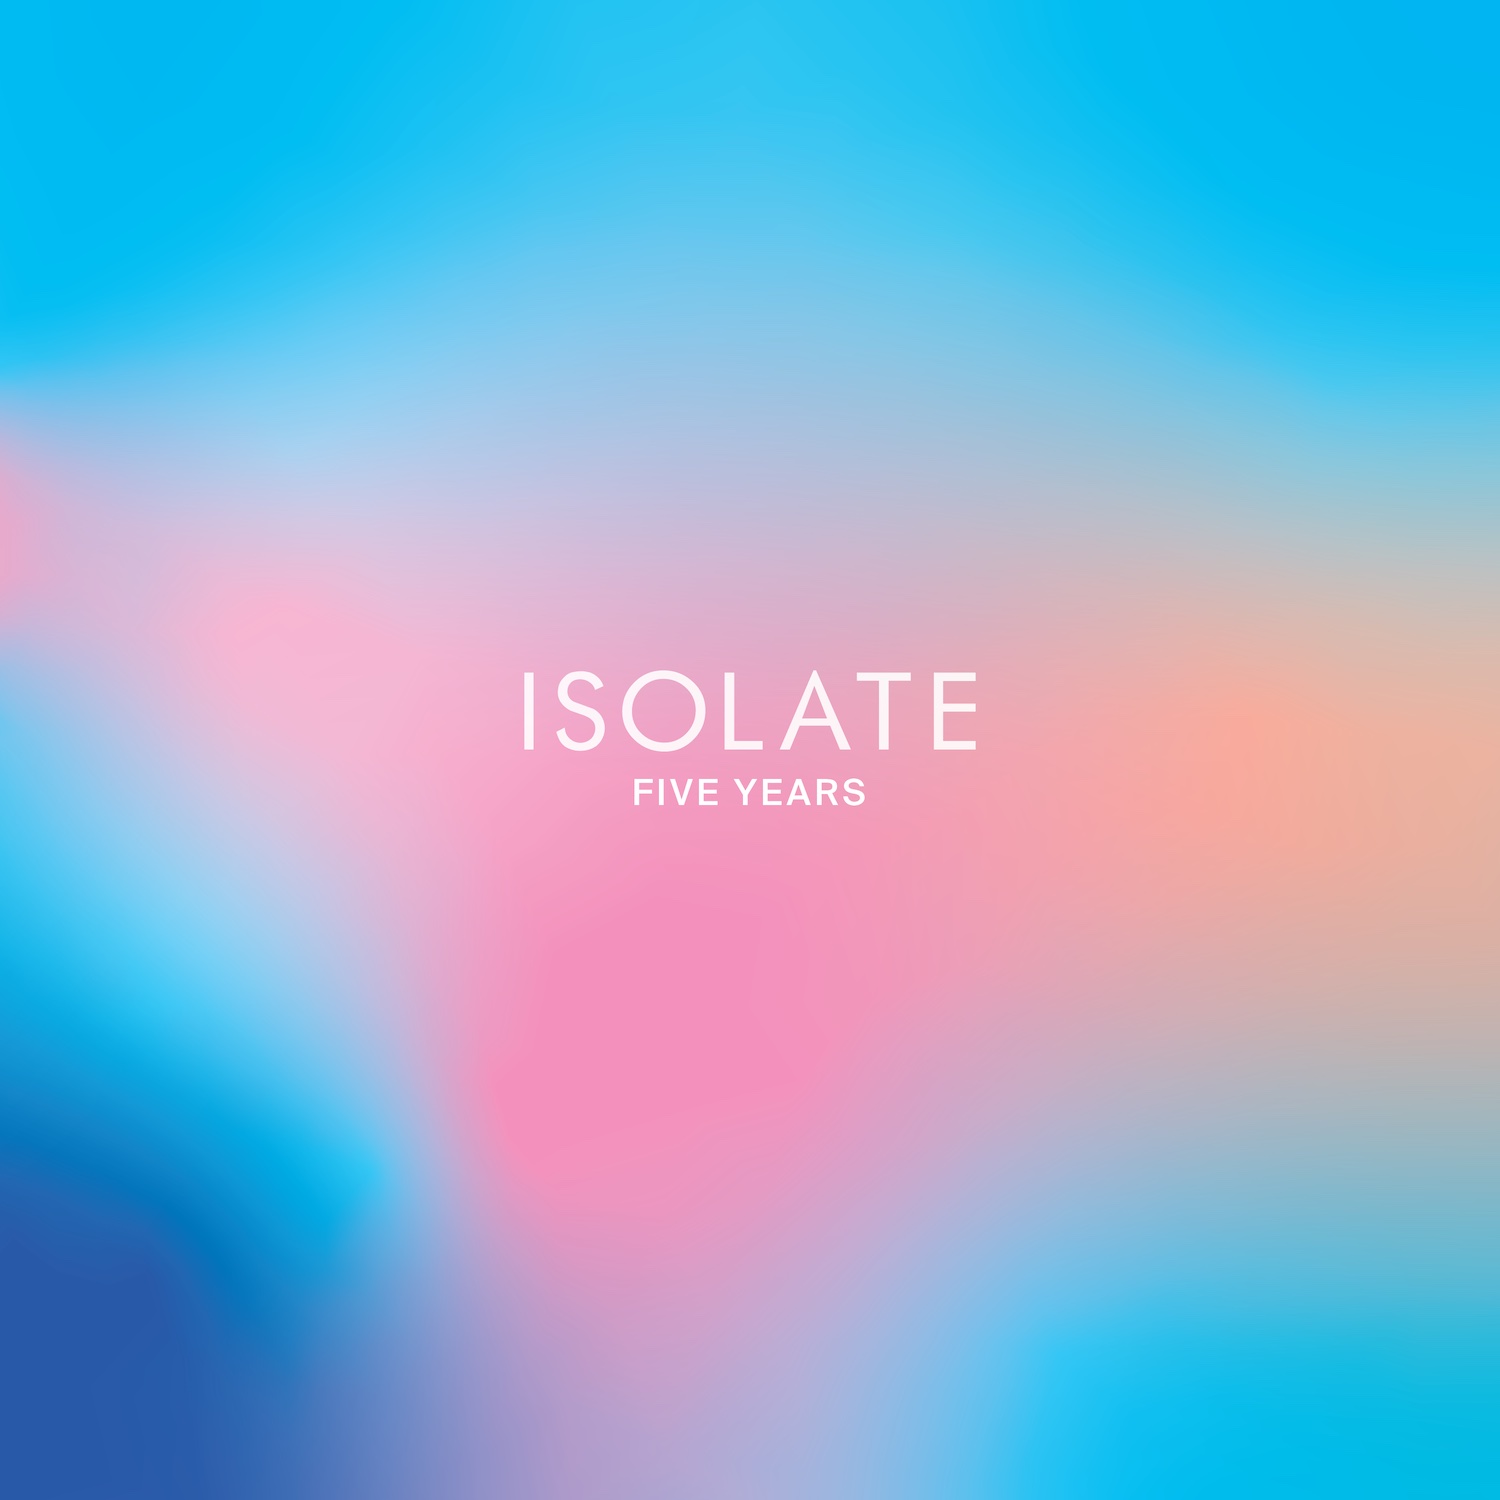 ISOLATE Celebrates Five Year Anniversary with 11-track Remix Compilation